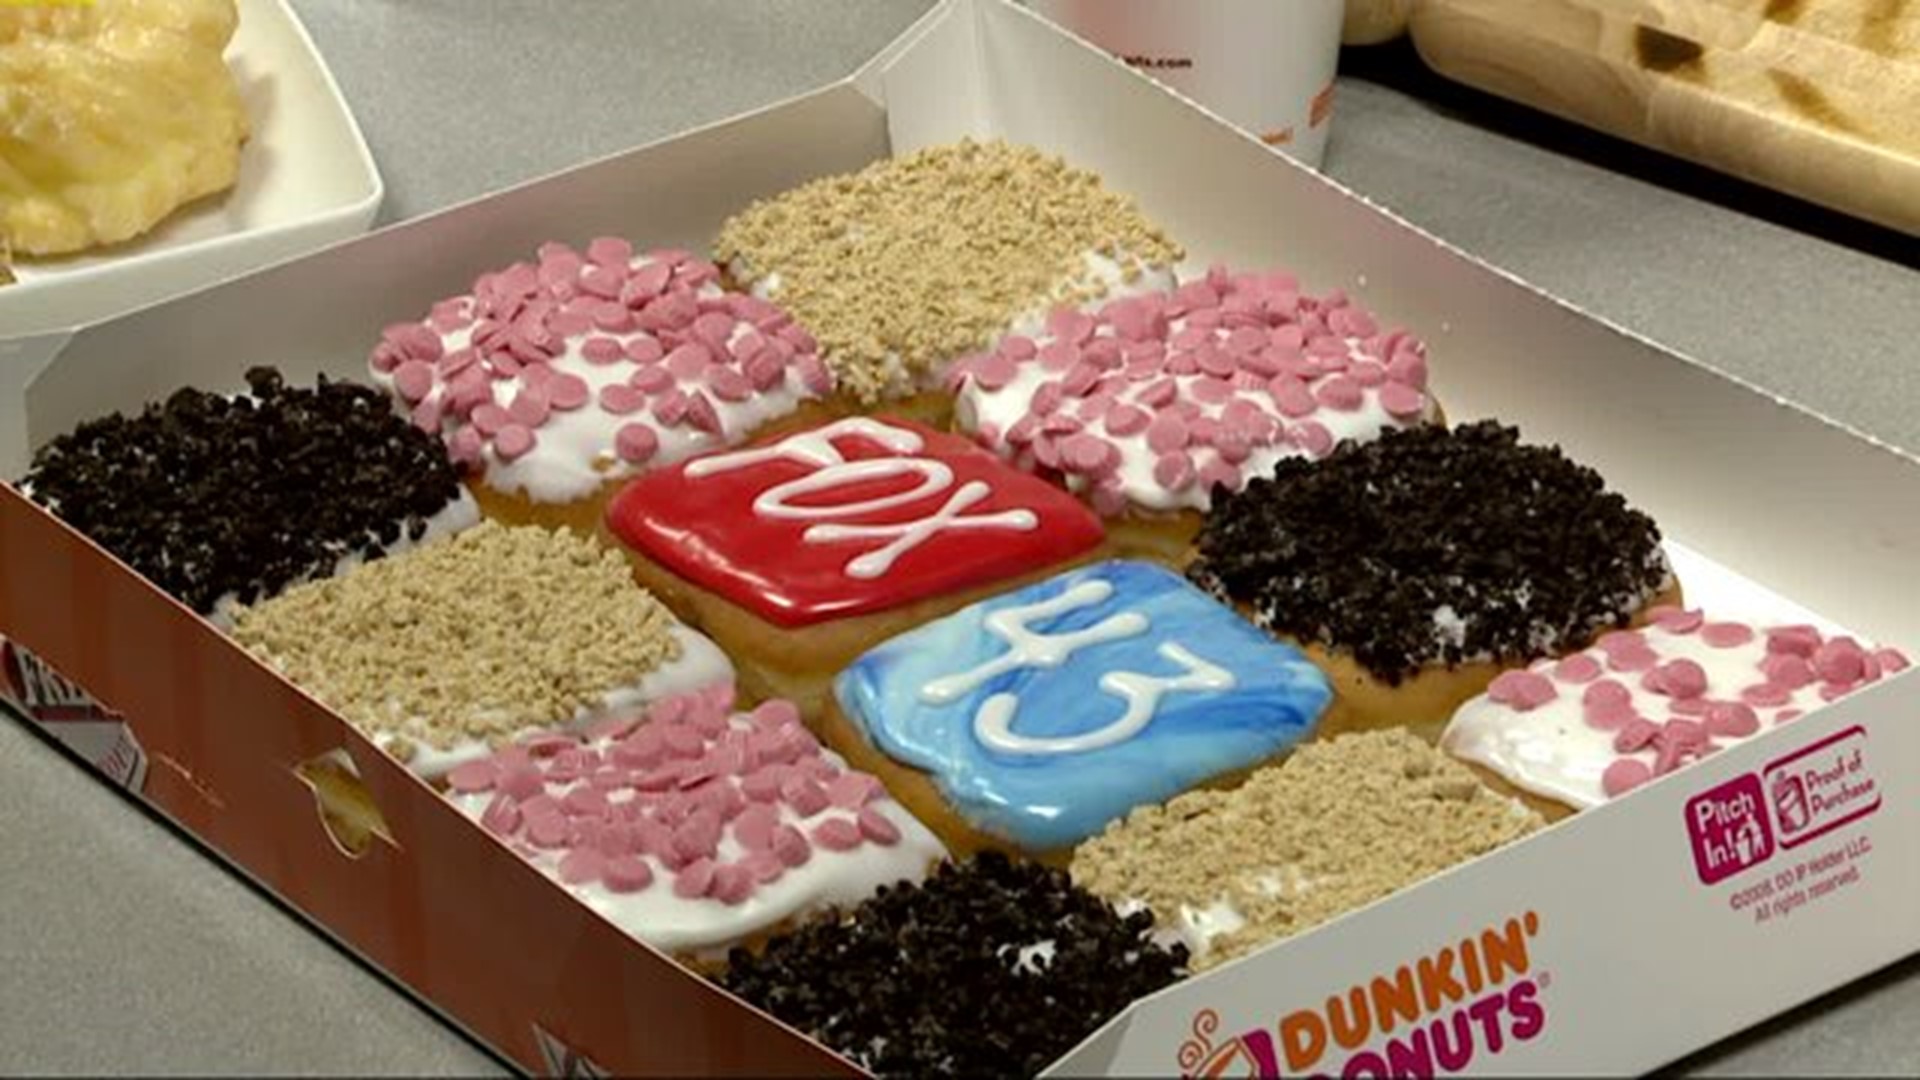 Dunkin Donuts unveils new cheesecake squares